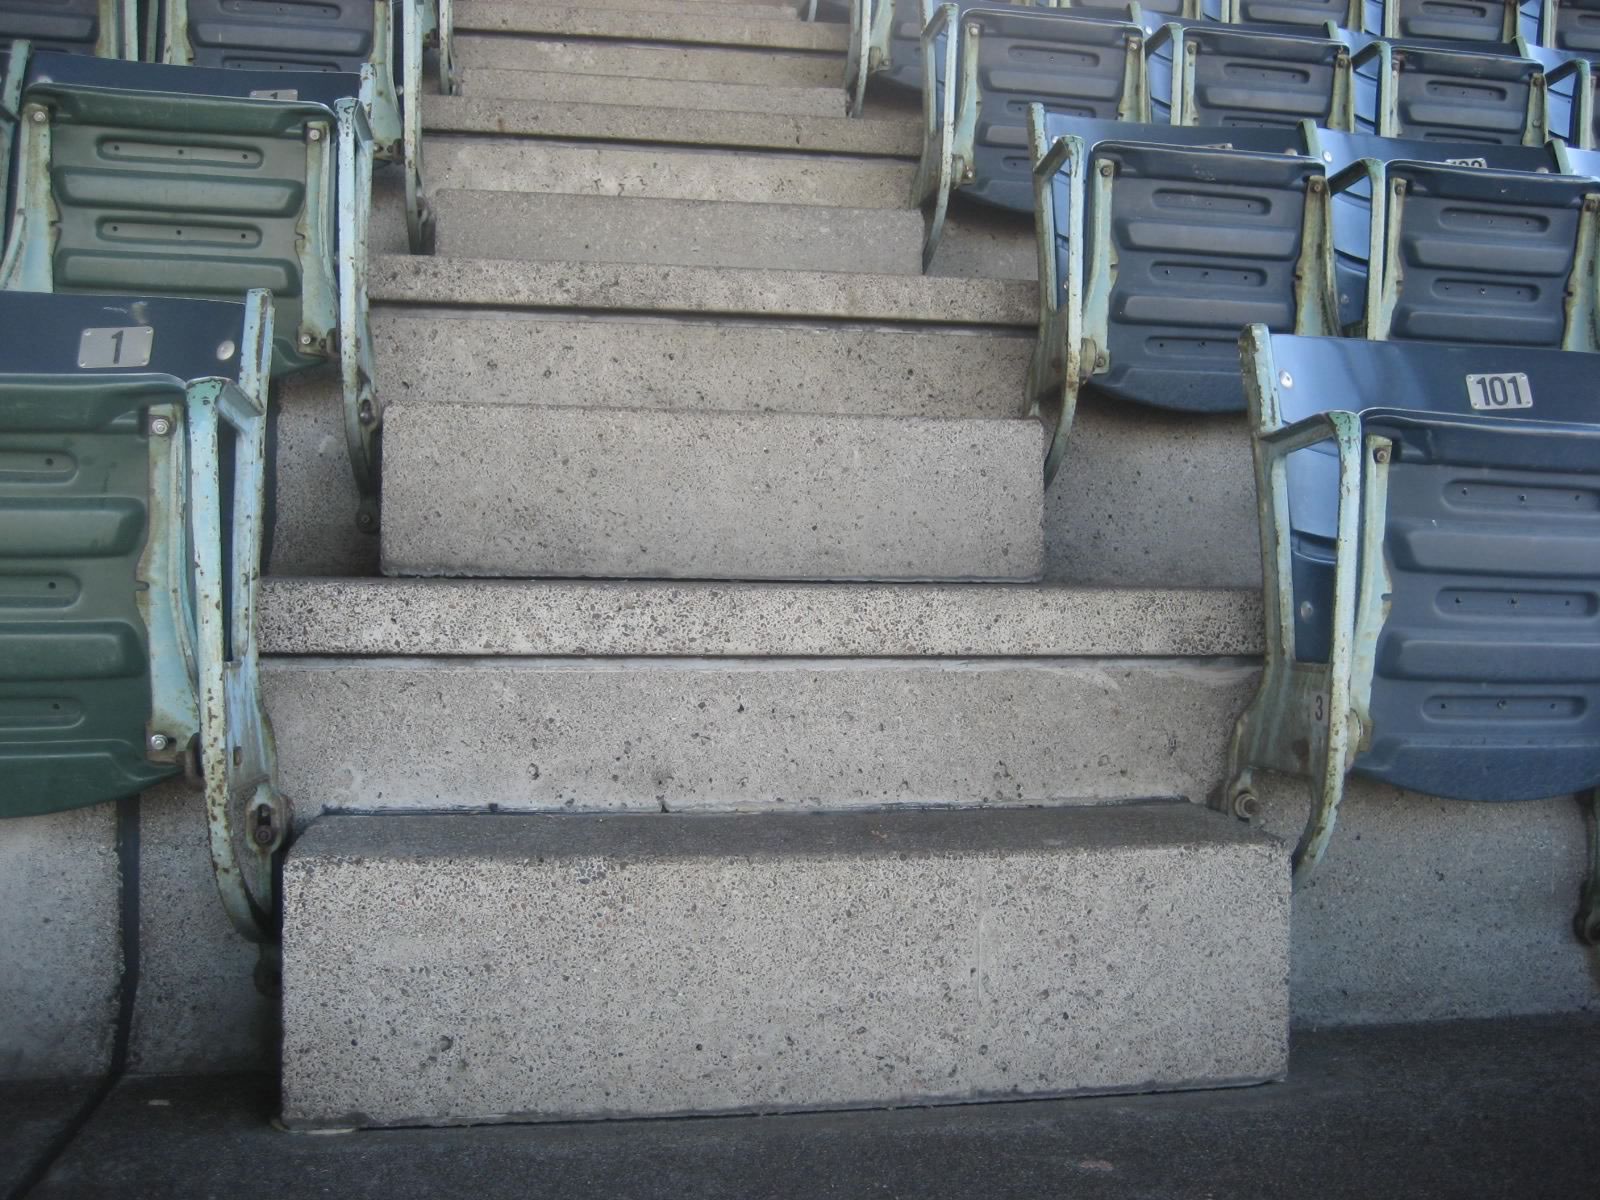 400 level stairs at wrigley field